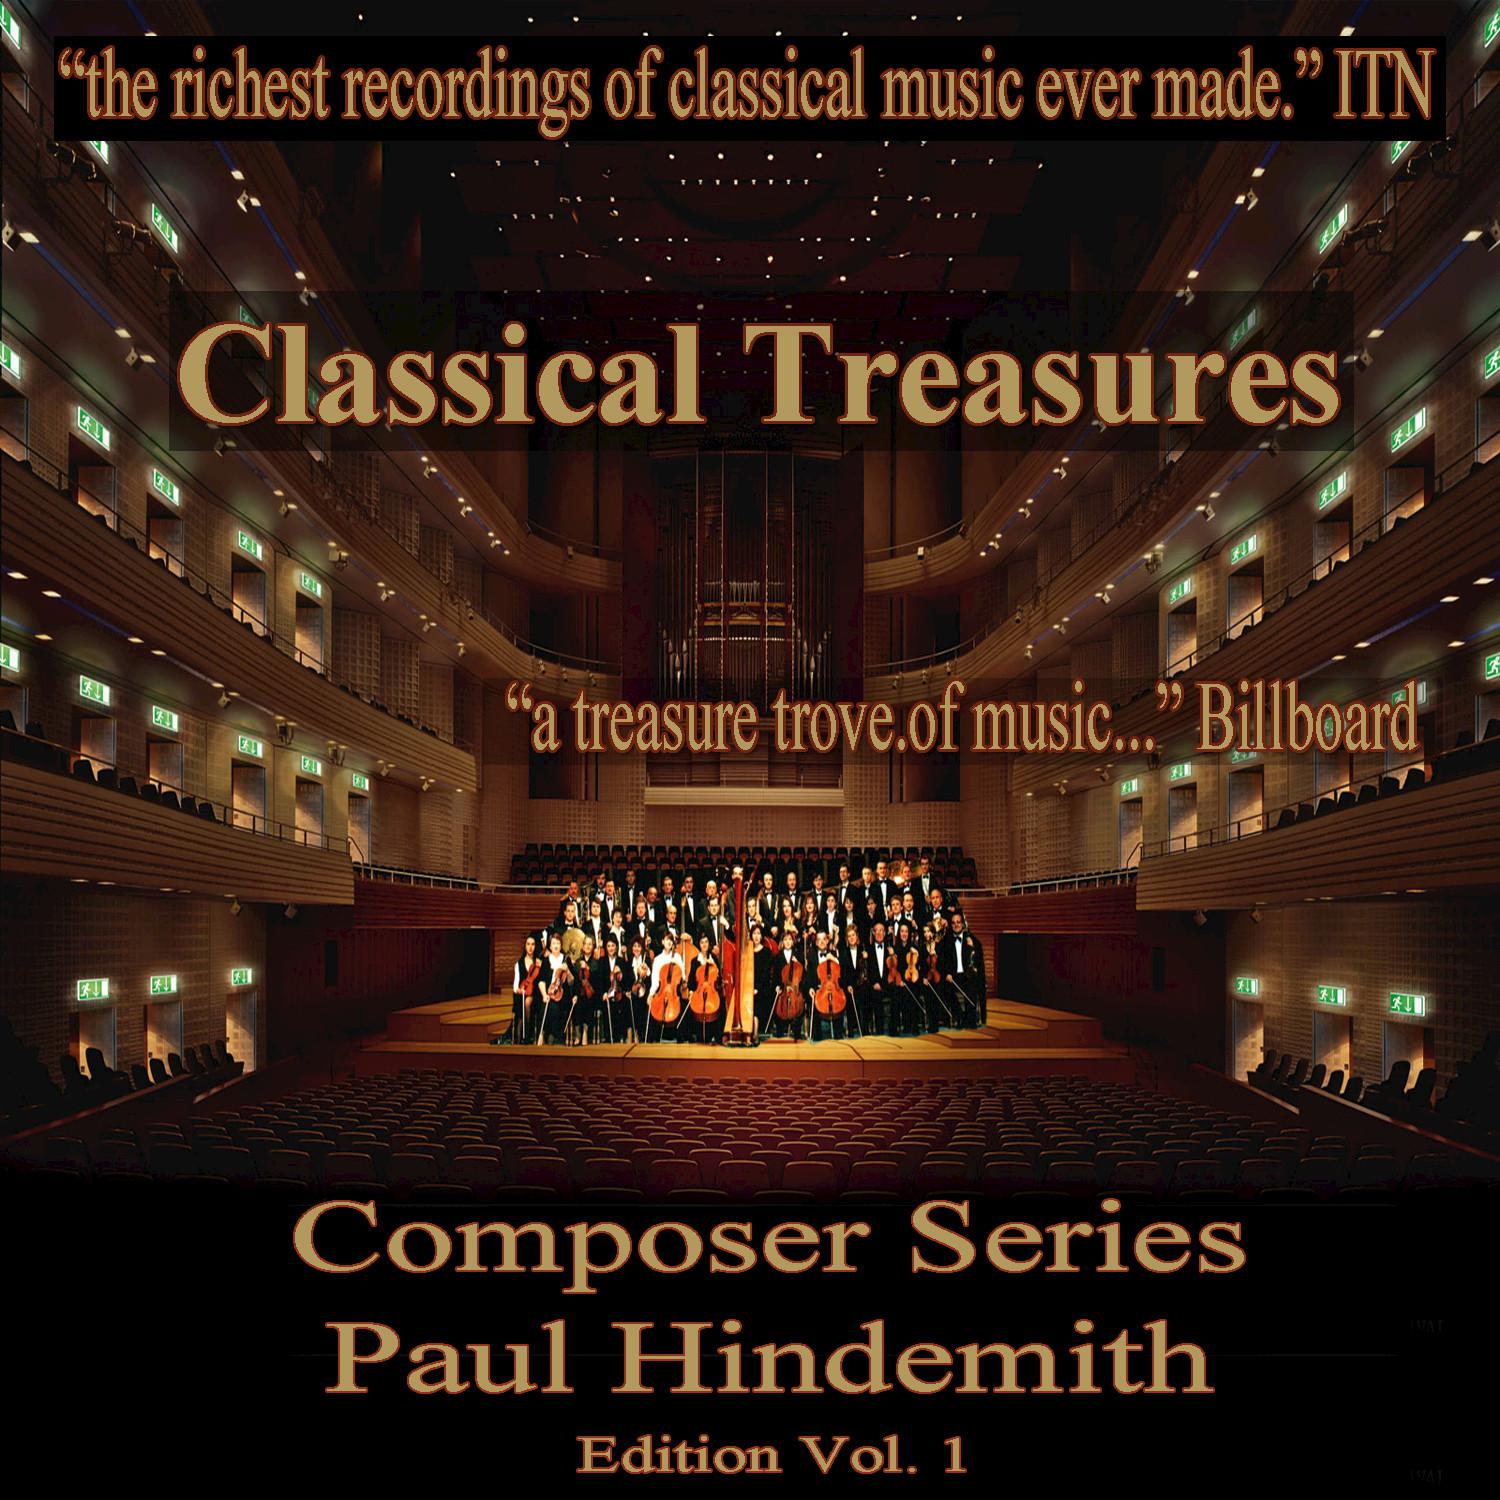 Classical Treasures Composer Series: Paul Hindemith, Vol. 1